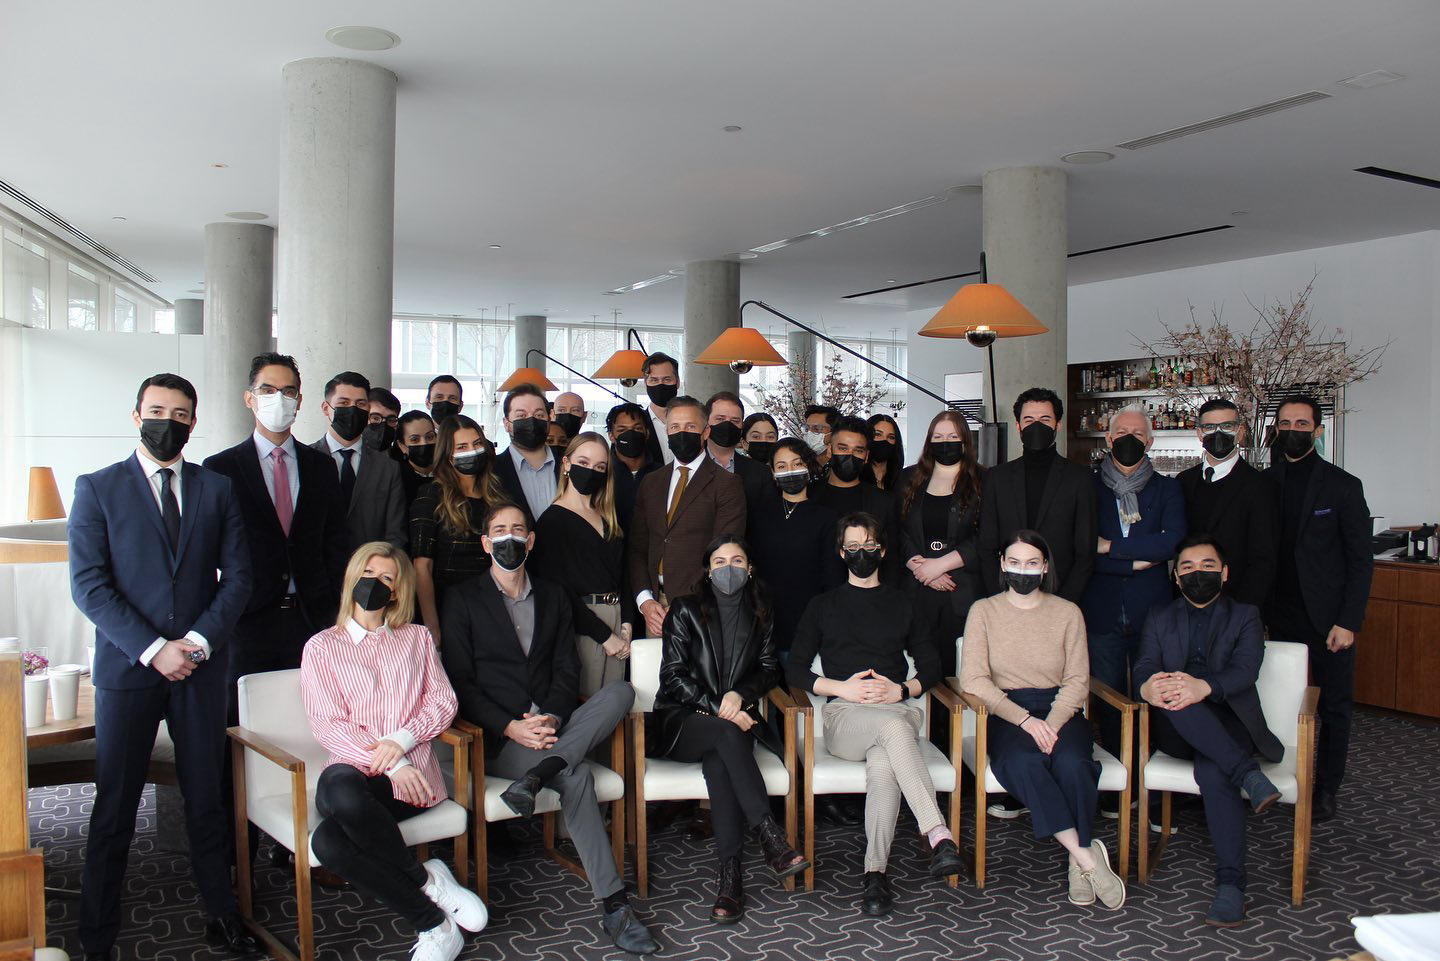 image  1 Jean-Georges Restaurants - Yesterday, we hosted our first Leadership Service Seminar at #perryst_nyc